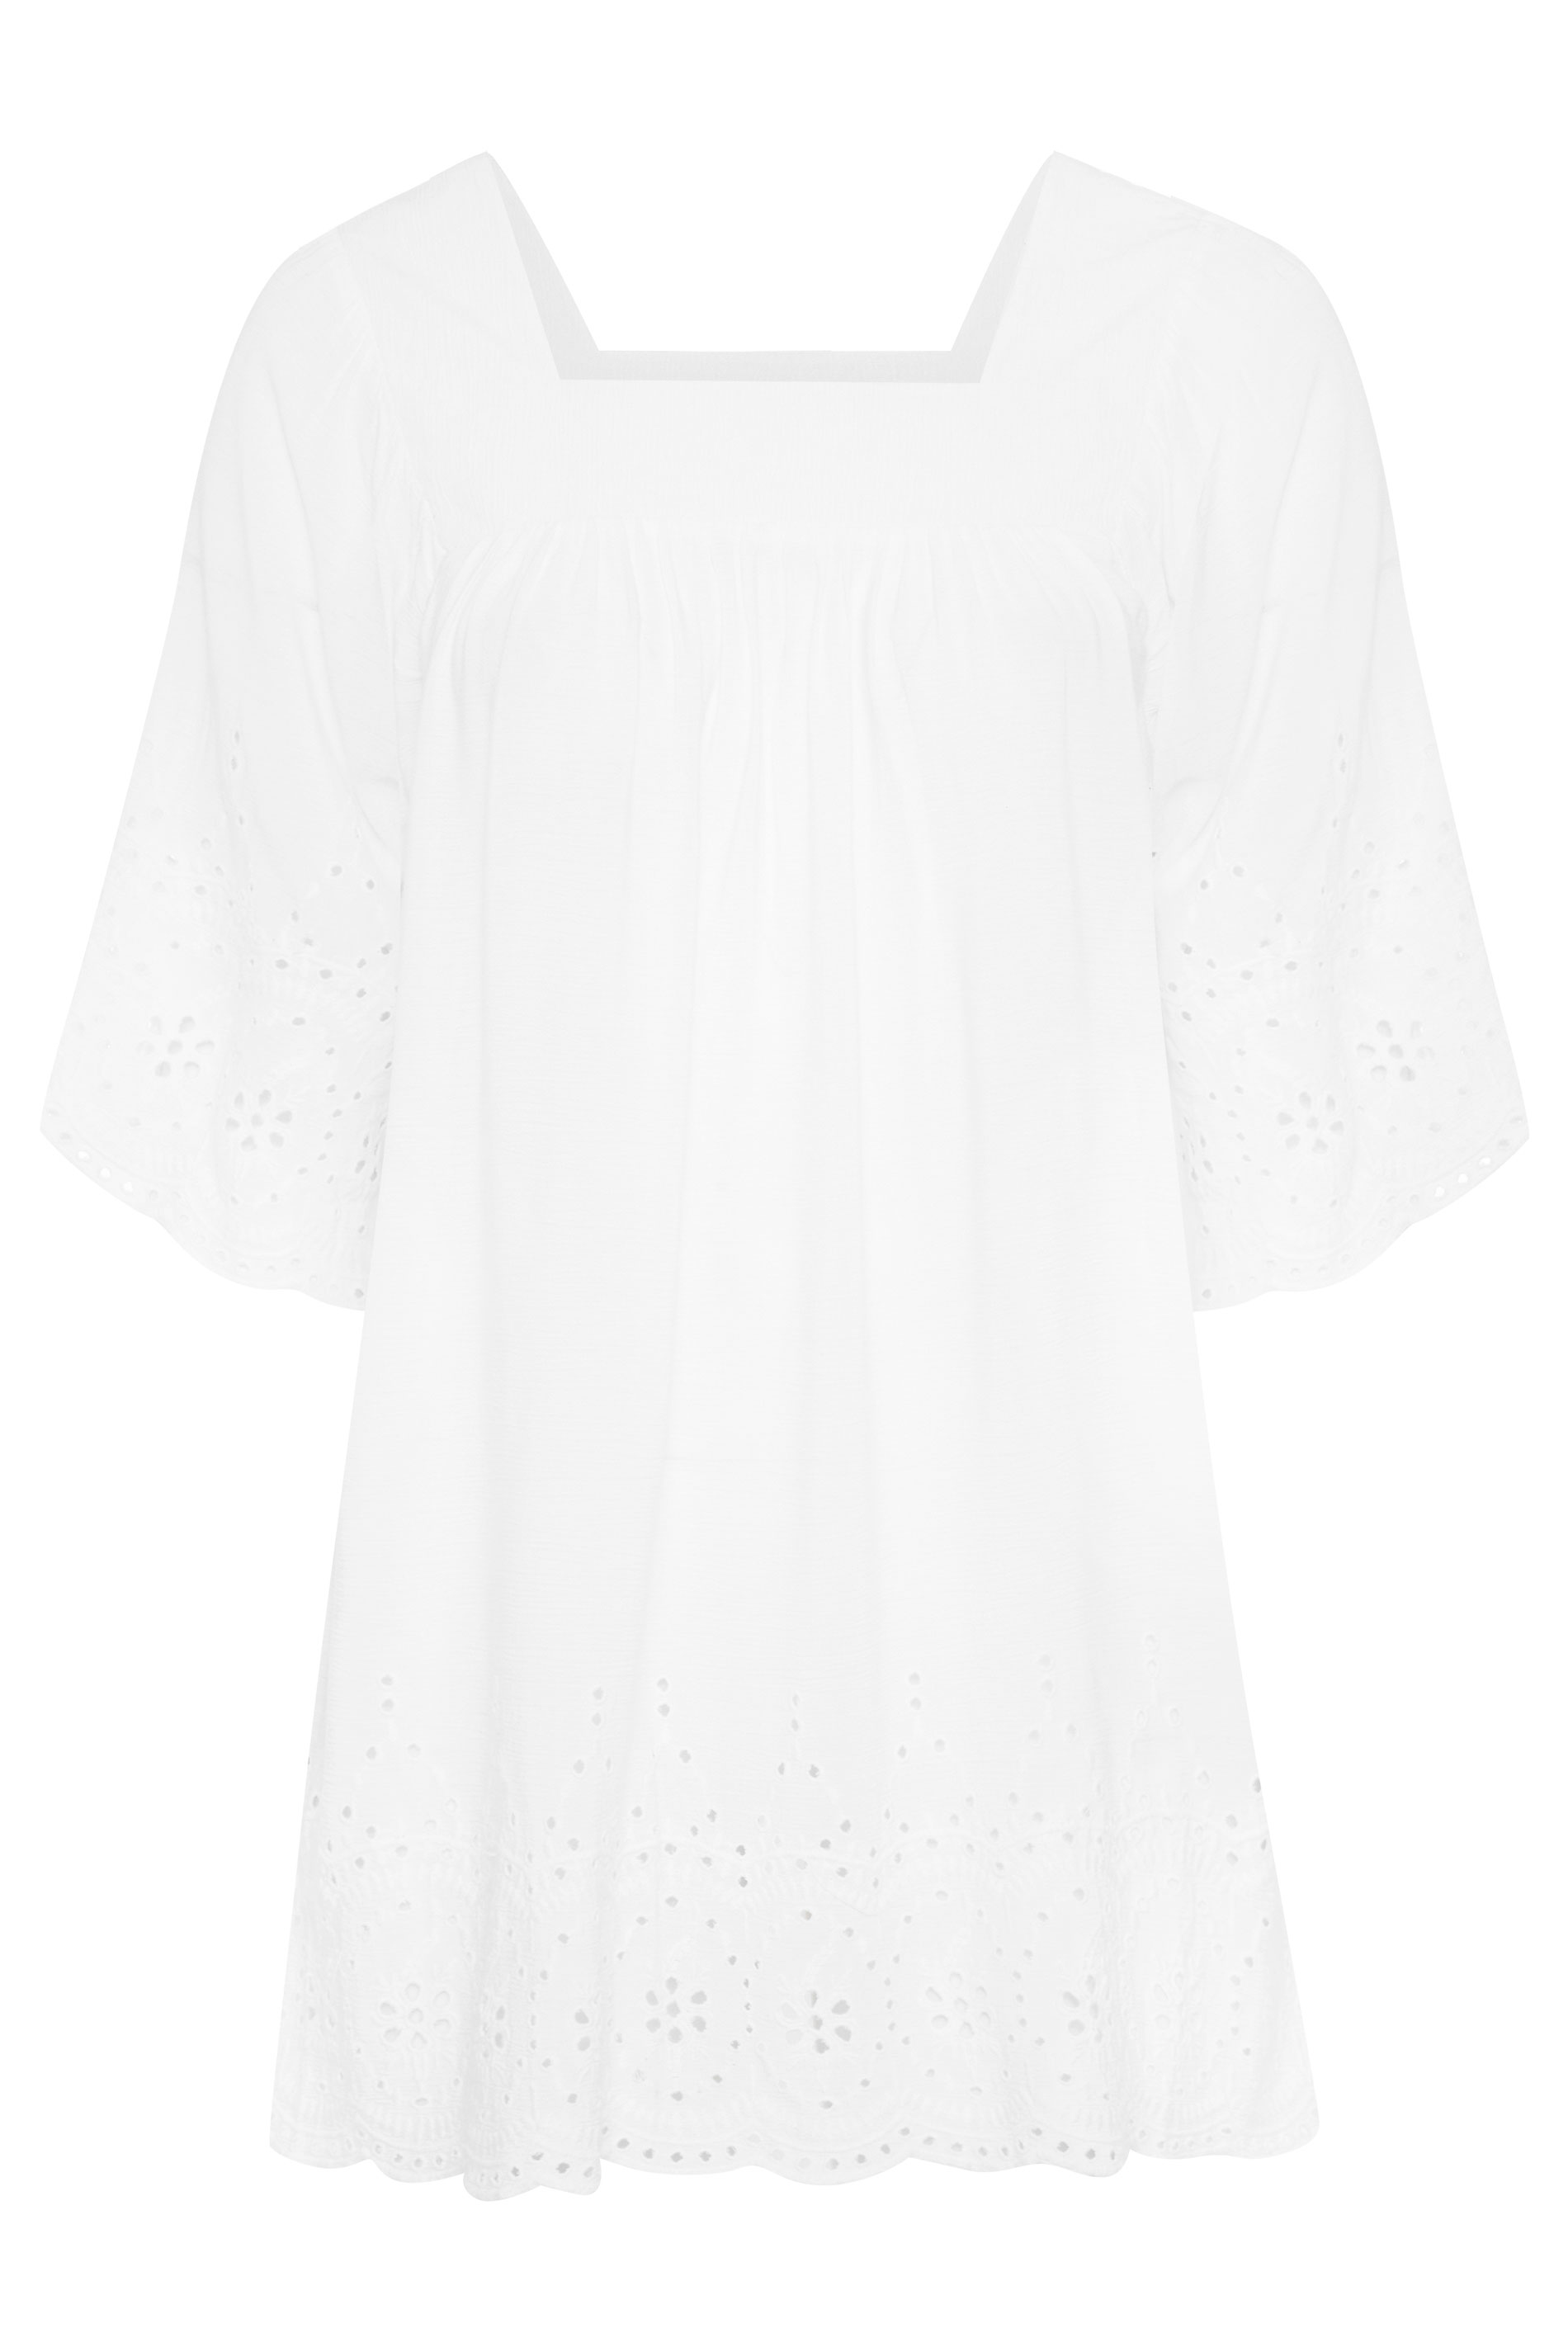 Grande taille  Tops Grande taille  Tops Casual | Top Blanc Broderie Anglaise Encolures Carrée - KB31196